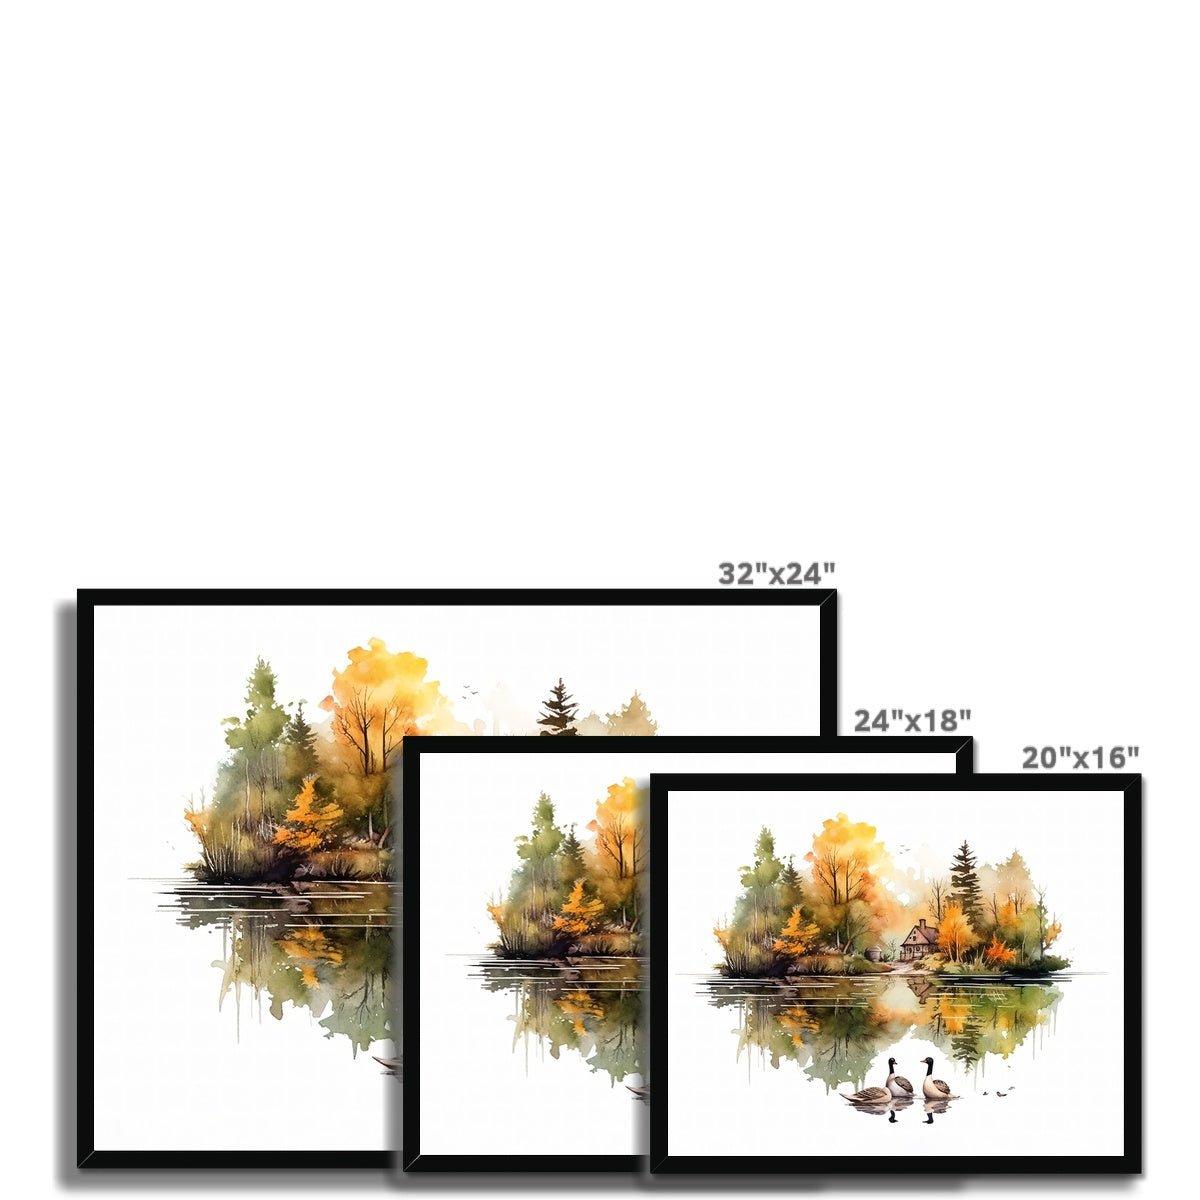 Nature's Serenity - Cozy Forest 4 5 - Landscapes Poster Print by doingly